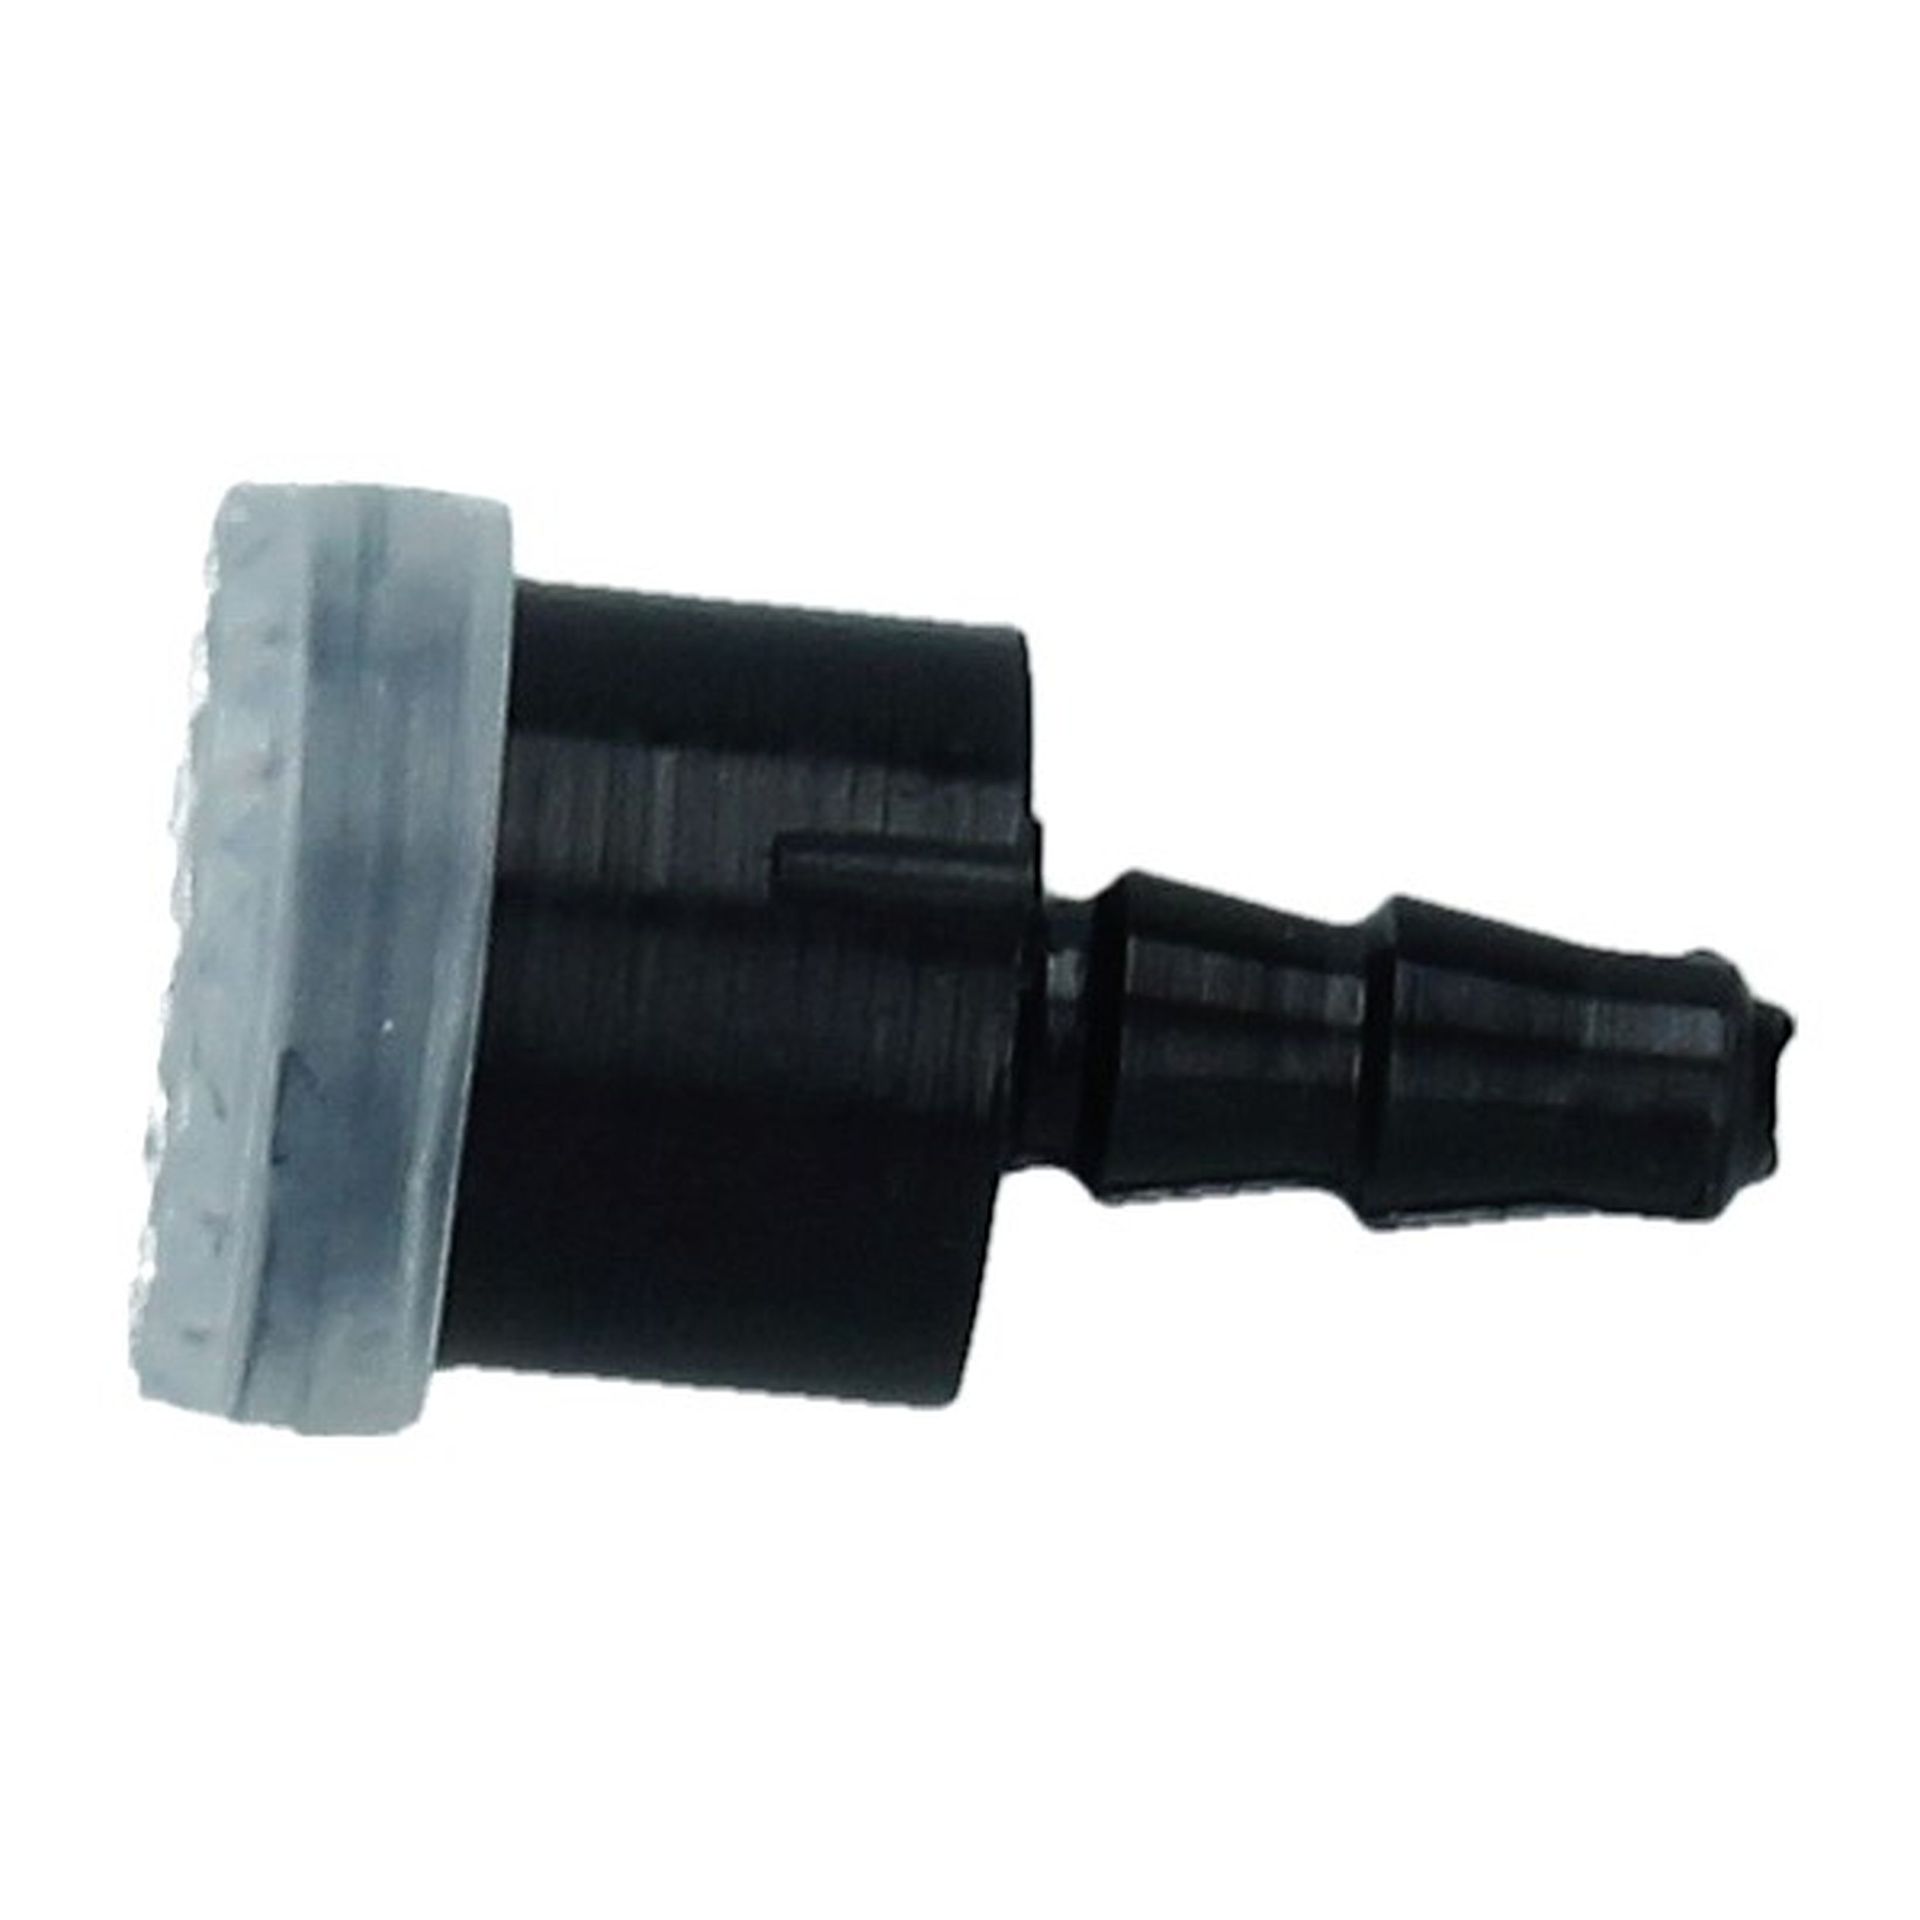 Washer Foot Valve with Filter